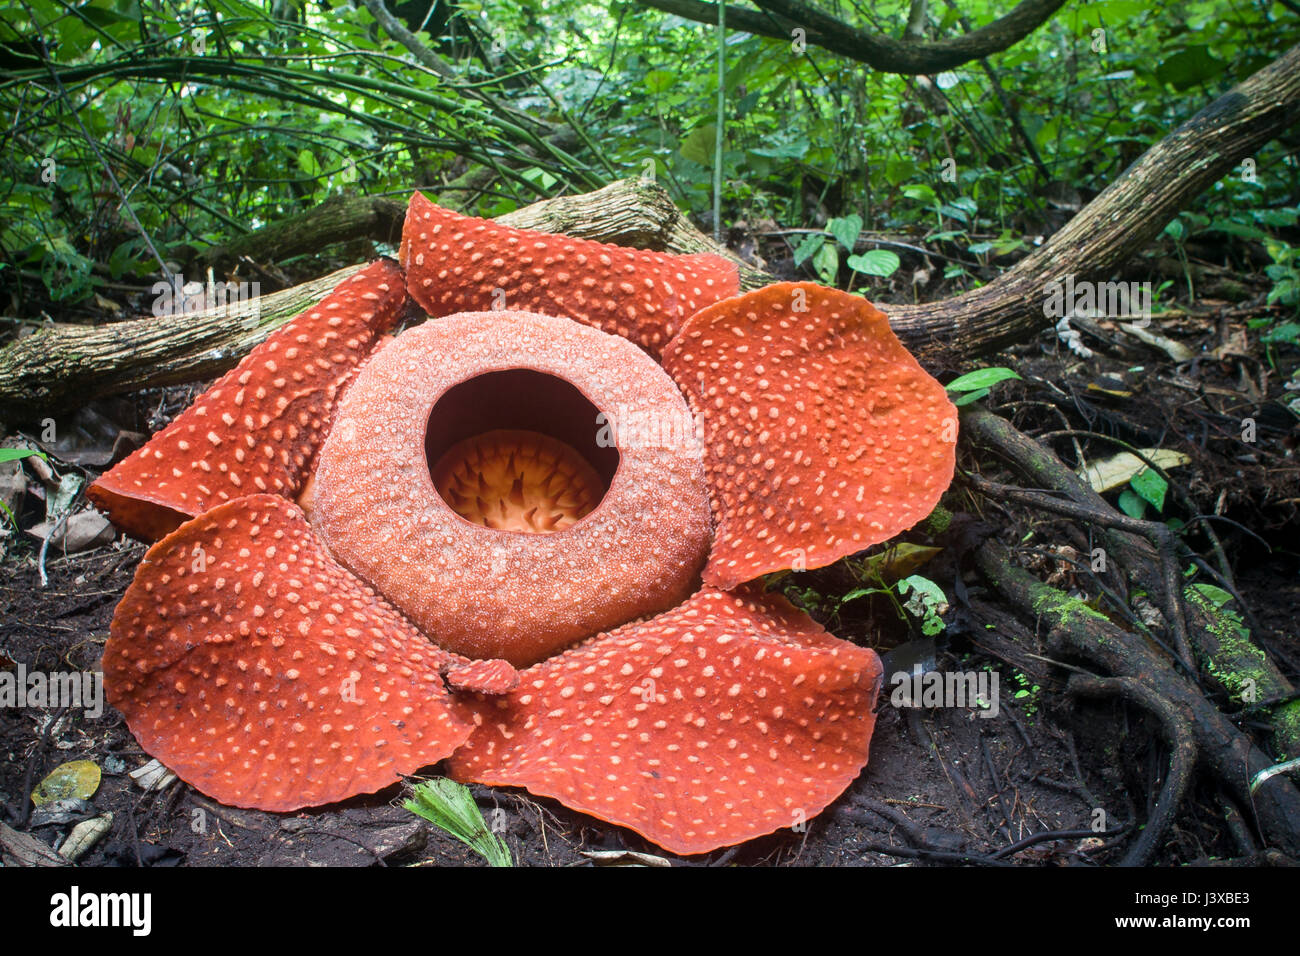 A critically endangered Rafflesia arnoldii in full bloom, the world's largest flower.  This plant parasitizes the vine in the background. The smell of Stock Photo